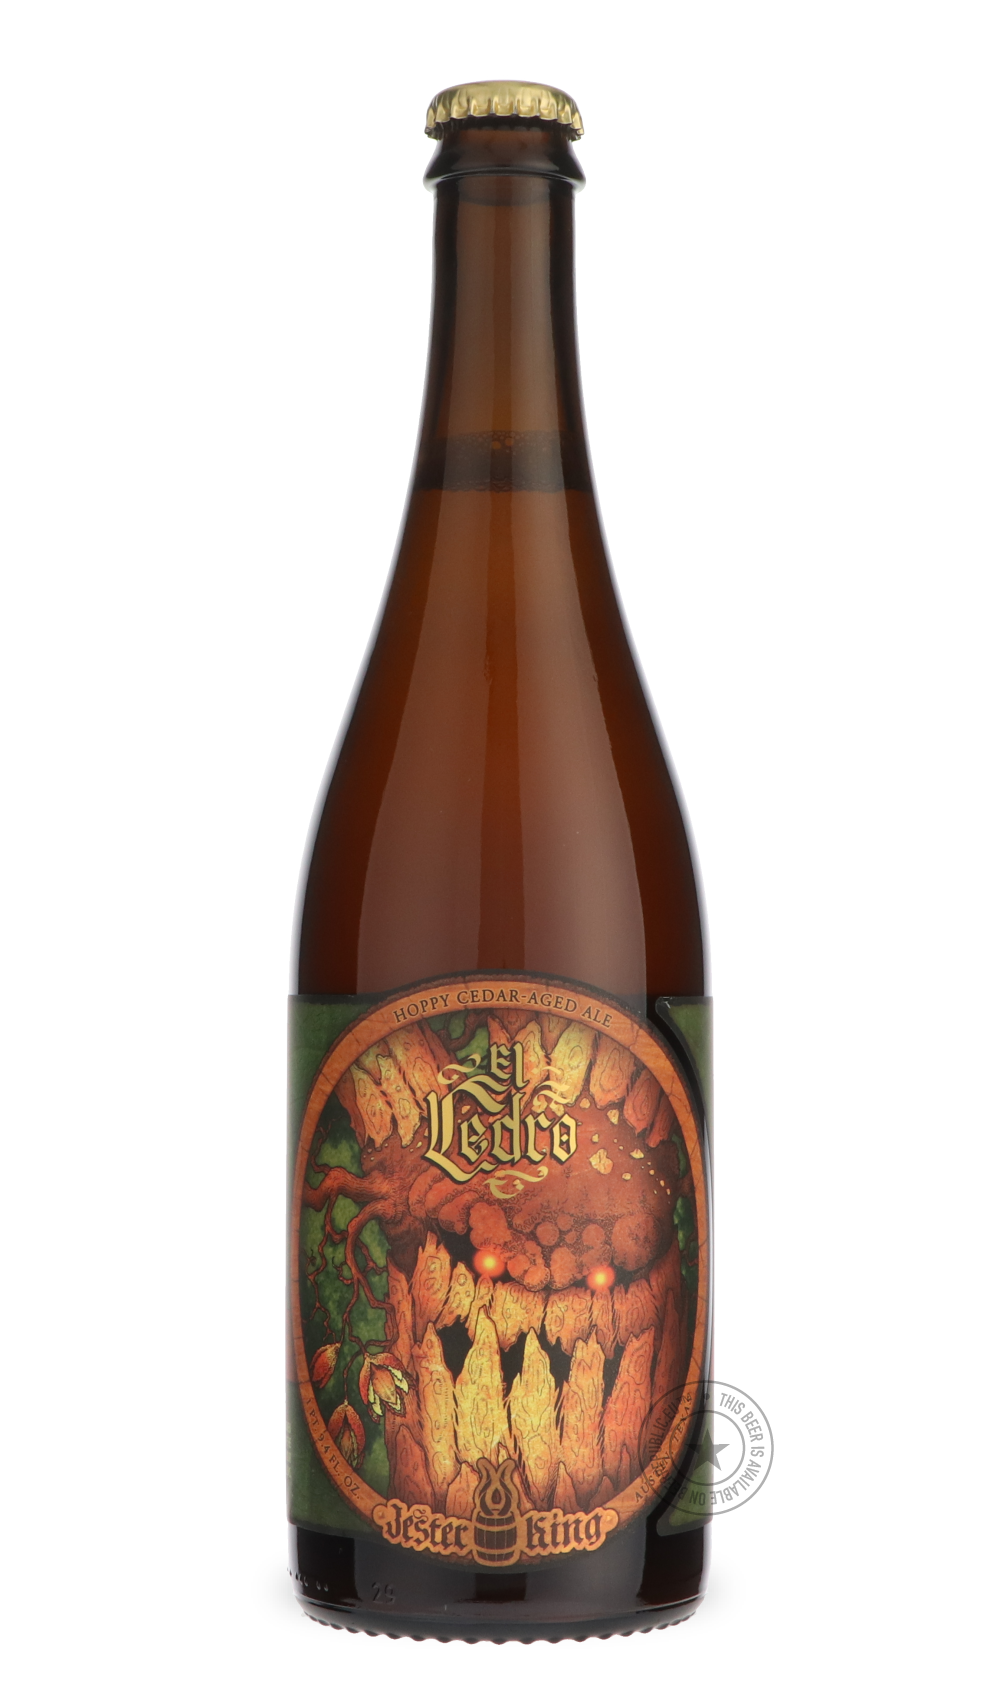 -Jester King- El Cedro Batch #14-Sour / Wild & Fruity- Only @ Beer Republic - The best online beer store for American & Canadian craft beer - Buy beer online from the USA and Canada - Bier online kopen - Amerikaans bier kopen - Craft beer store - Craft beer kopen - Amerikanisch bier kaufen - Bier online kaufen - Acheter biere online - IPA - Stout - Porter - New England IPA - Hazy IPA - Imperial Stout - Barrel Aged - Barrel Aged Imperial Stout - Brown - Dark beer - Blond - Blonde - Pilsner - Lager - Wheat - 